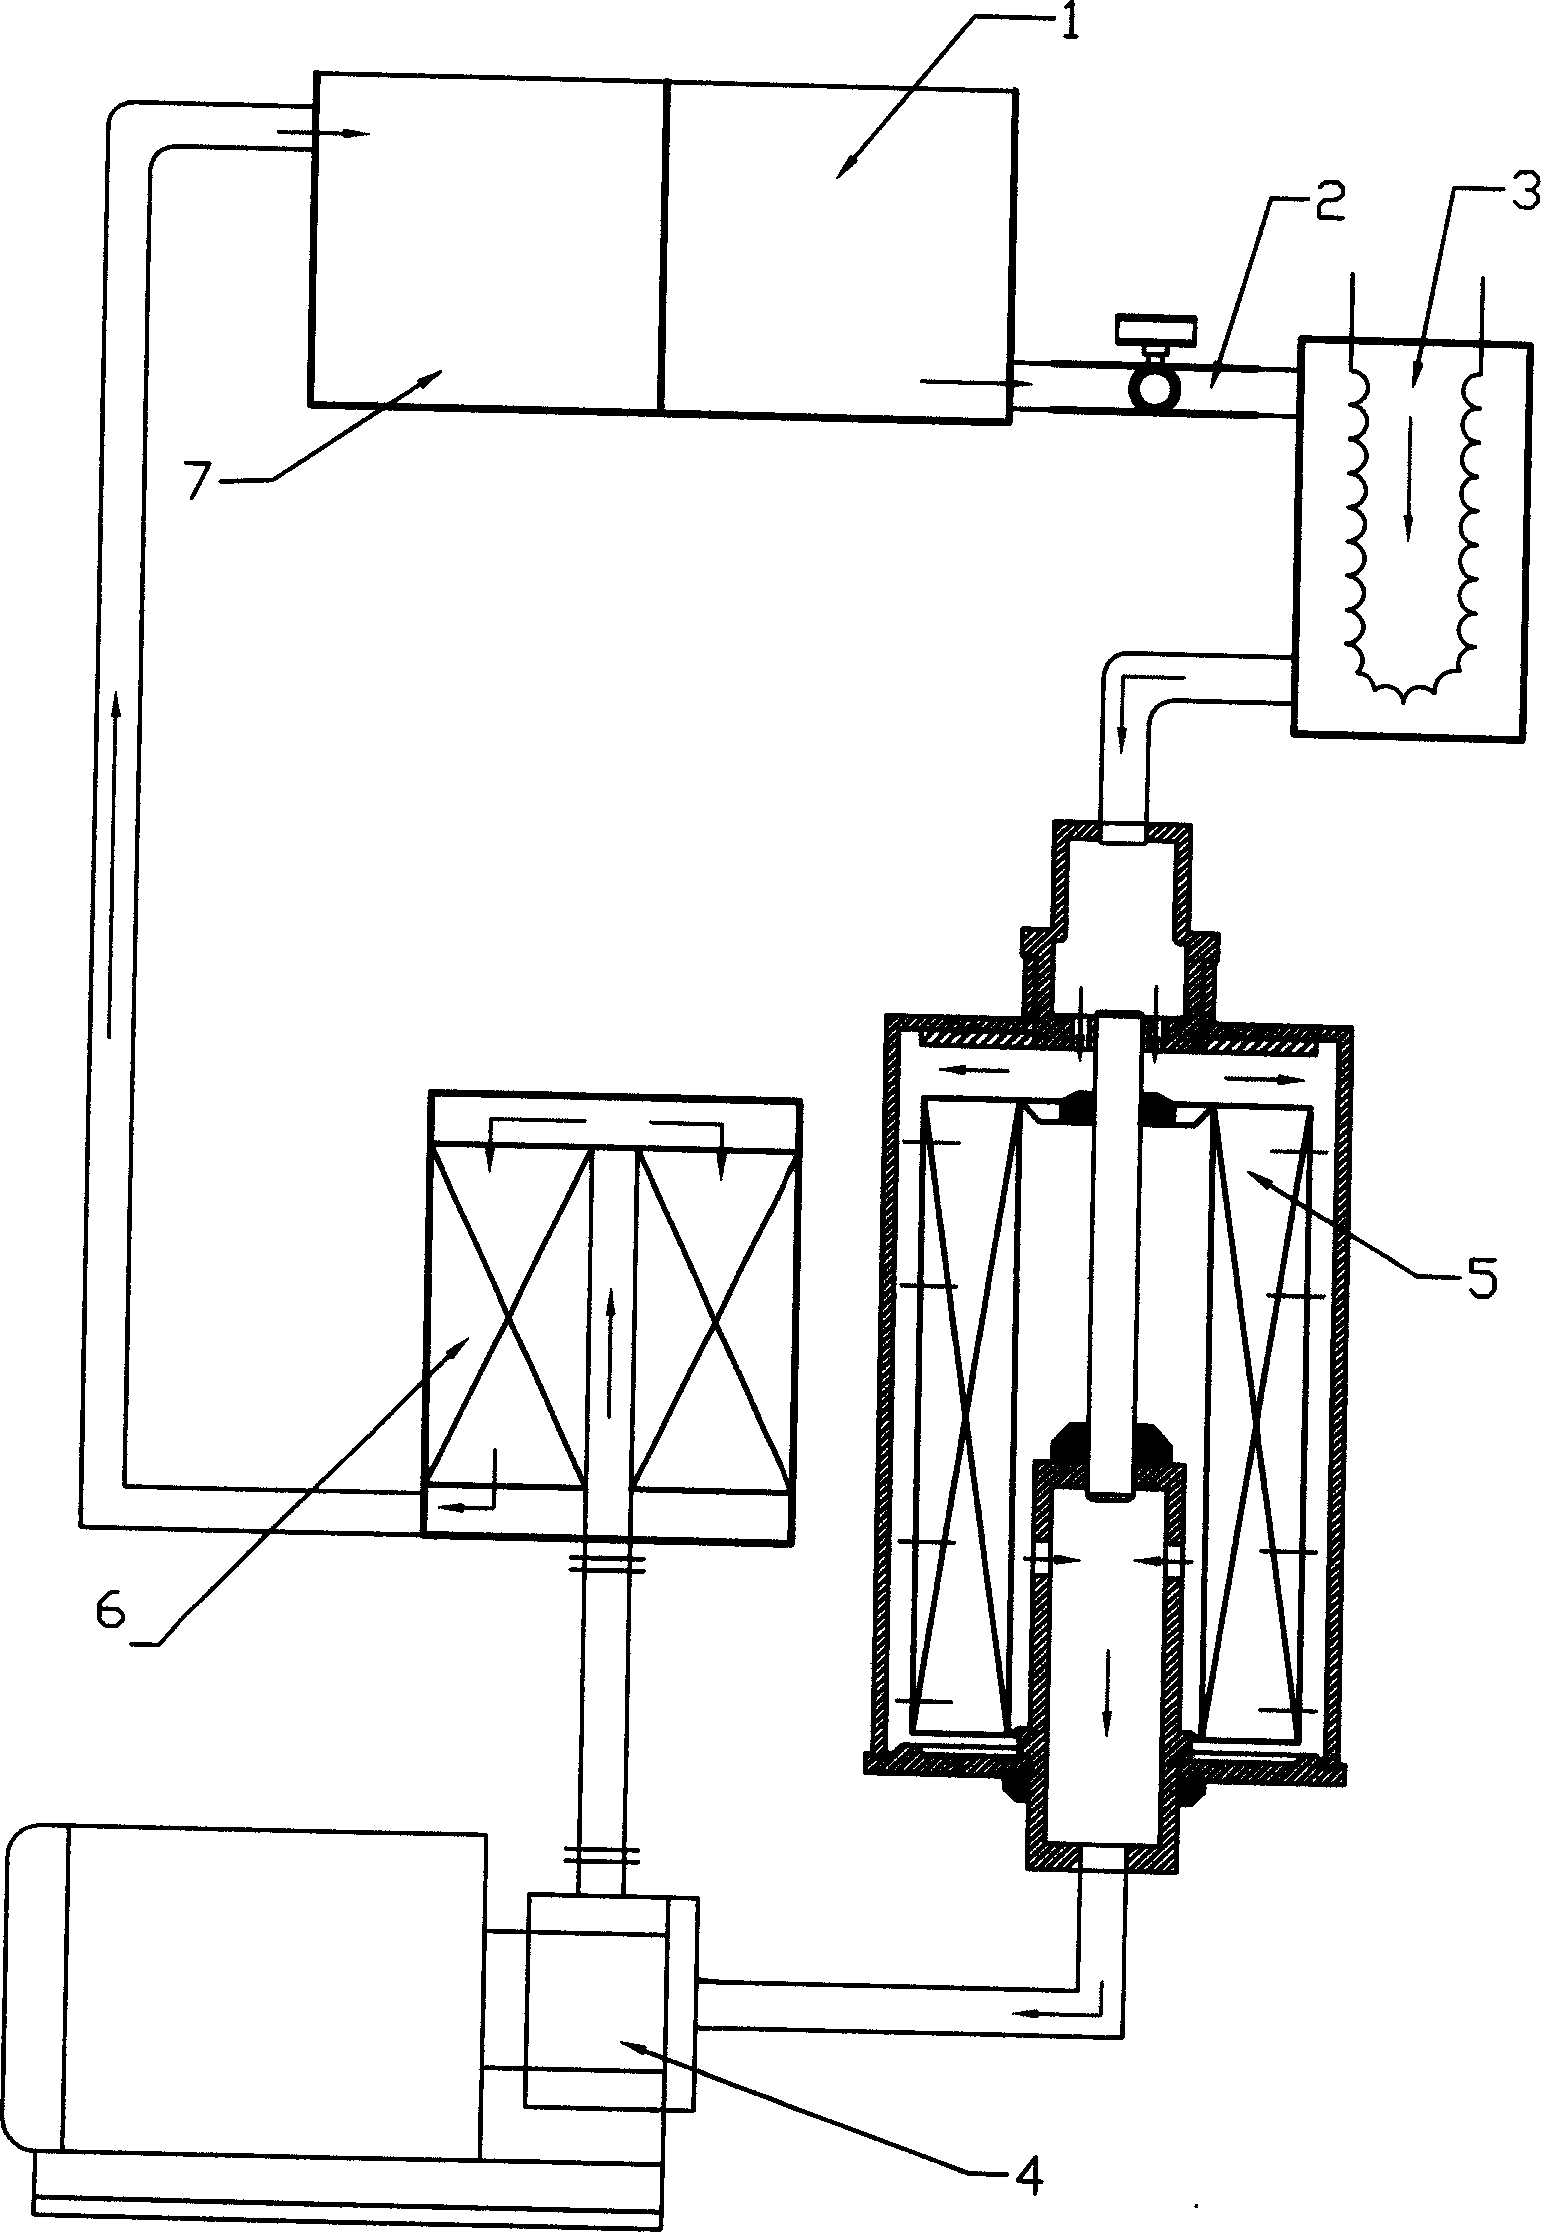 Method and system for purifying hydraulic-oil